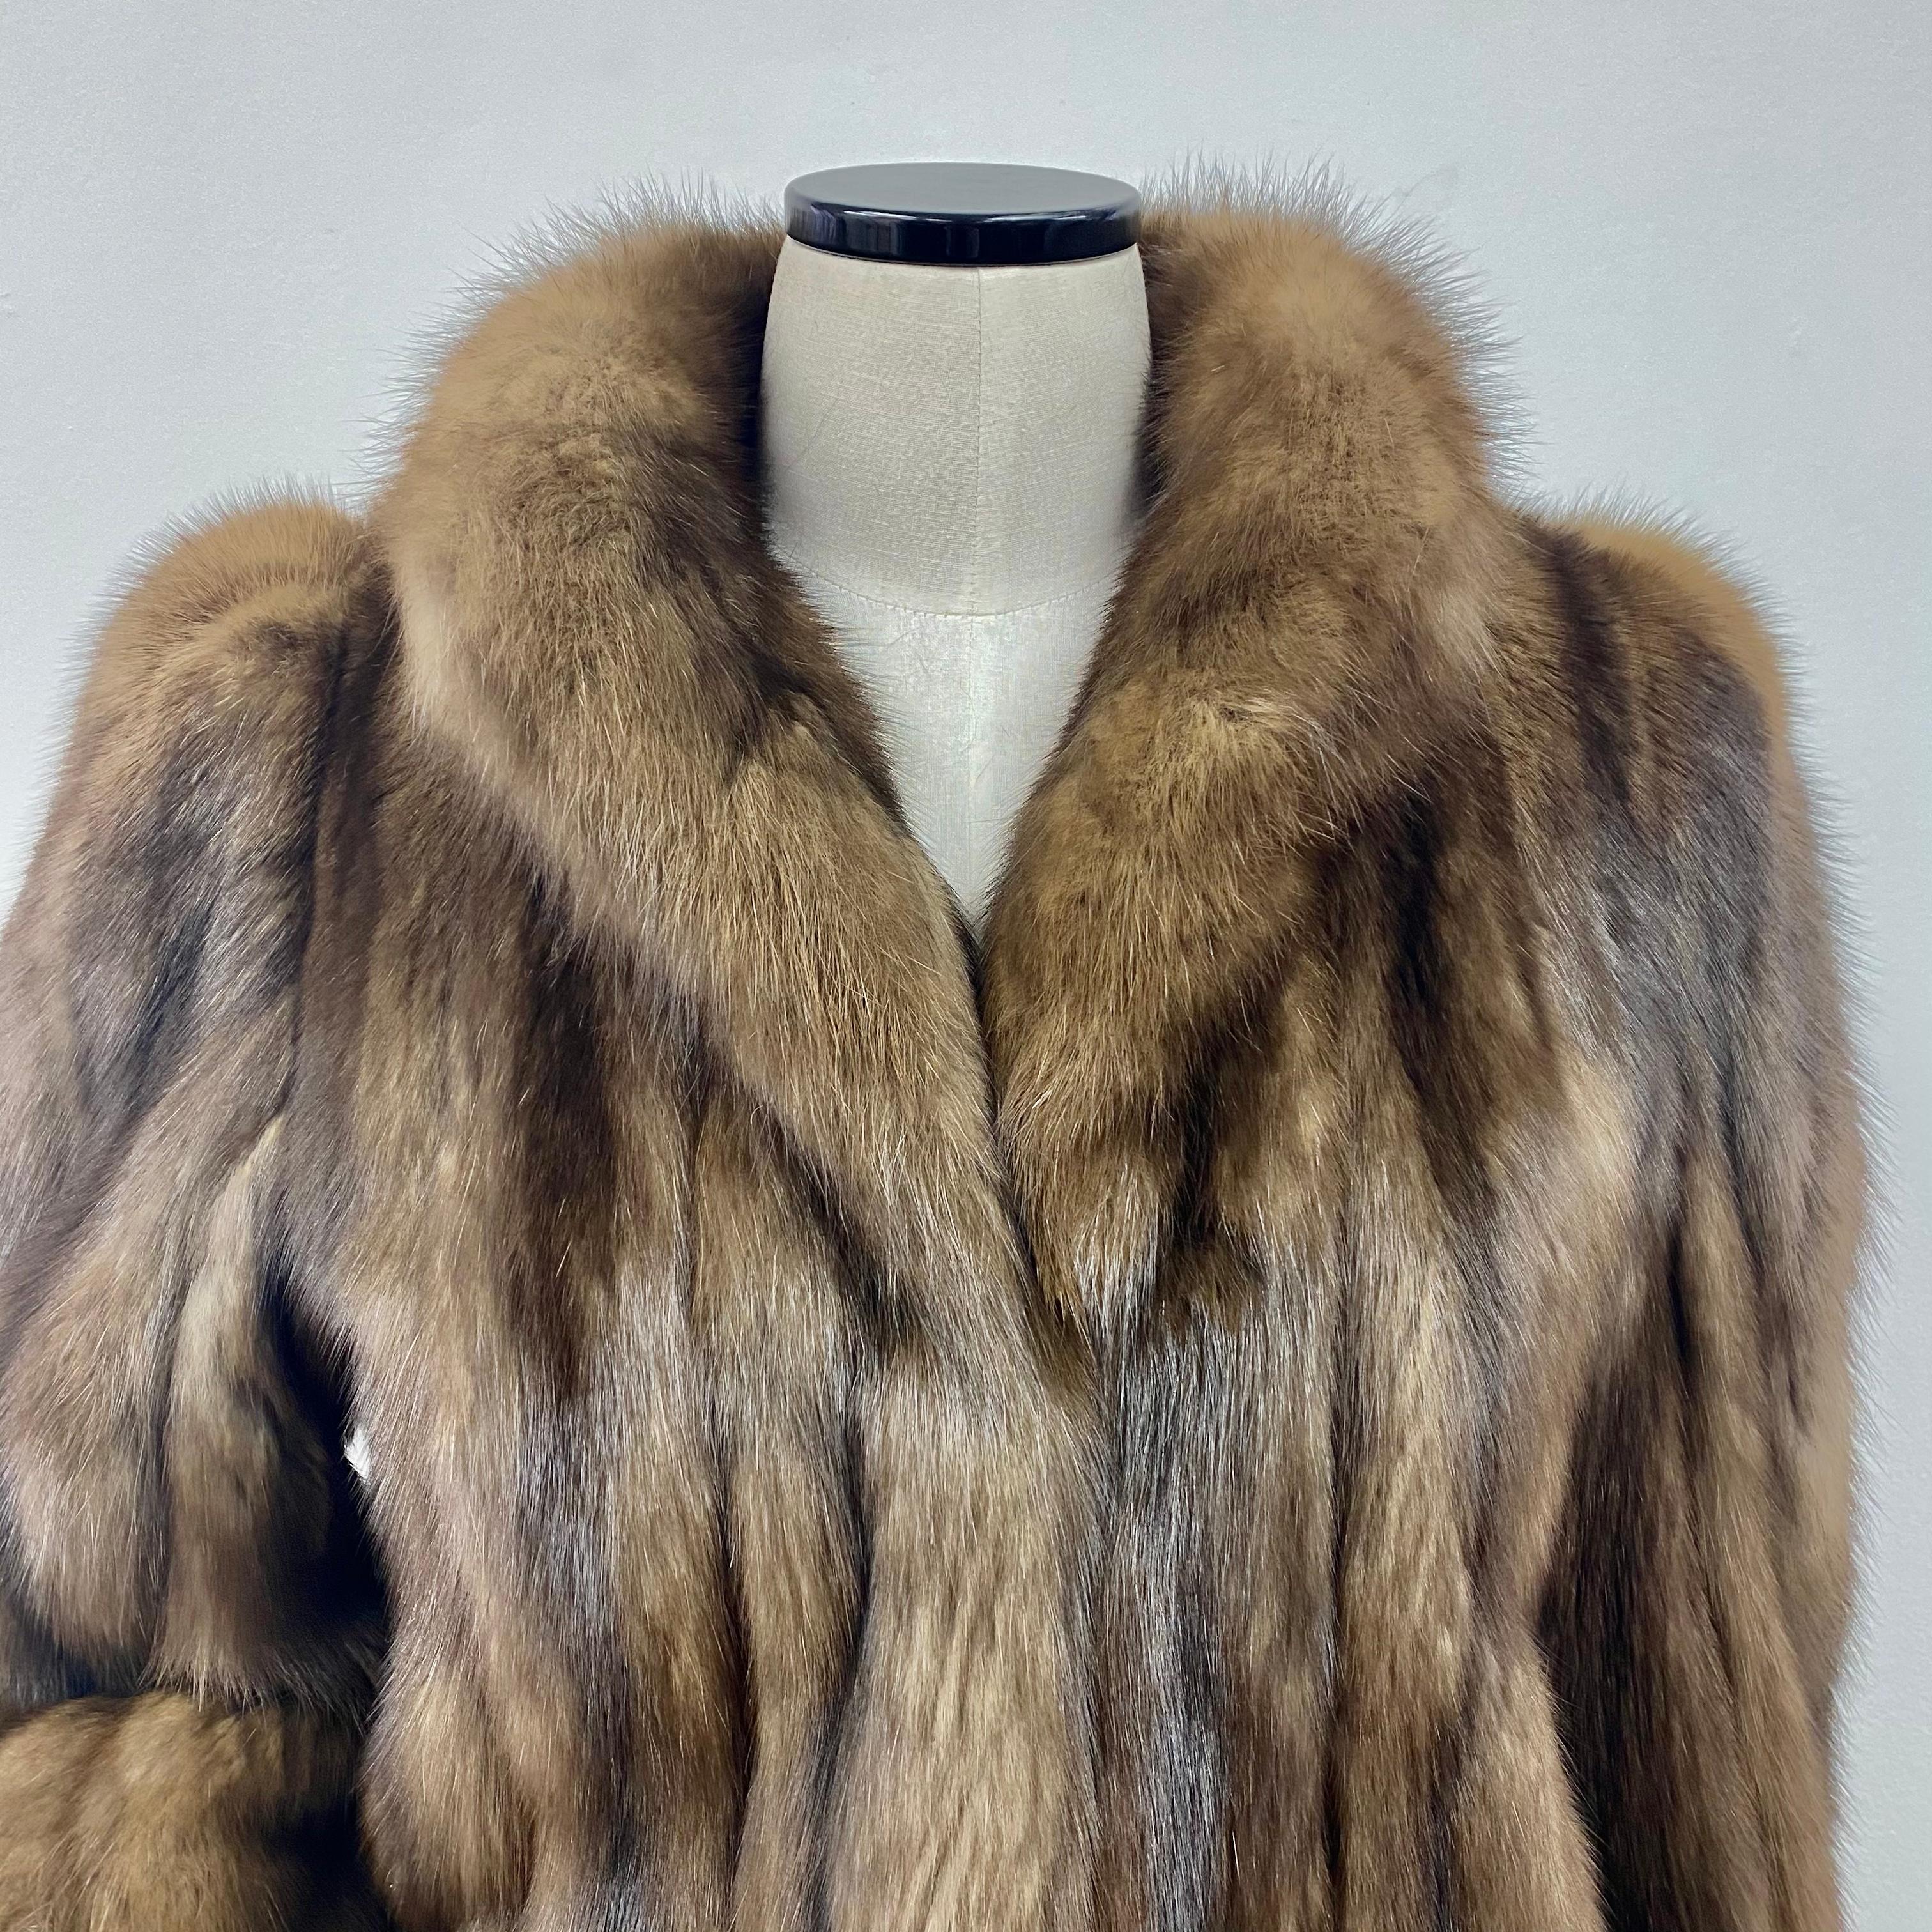 PRODUCT DESCRIPTION:

Exceptional Roberts San Francisco Russian Sable fur jacket with stunning silver highlights, extremely light and soft

Condition: Vintage New

Closure: German hooks

Color: Russian Sable 

Material: Russian Sable 

Garment type: